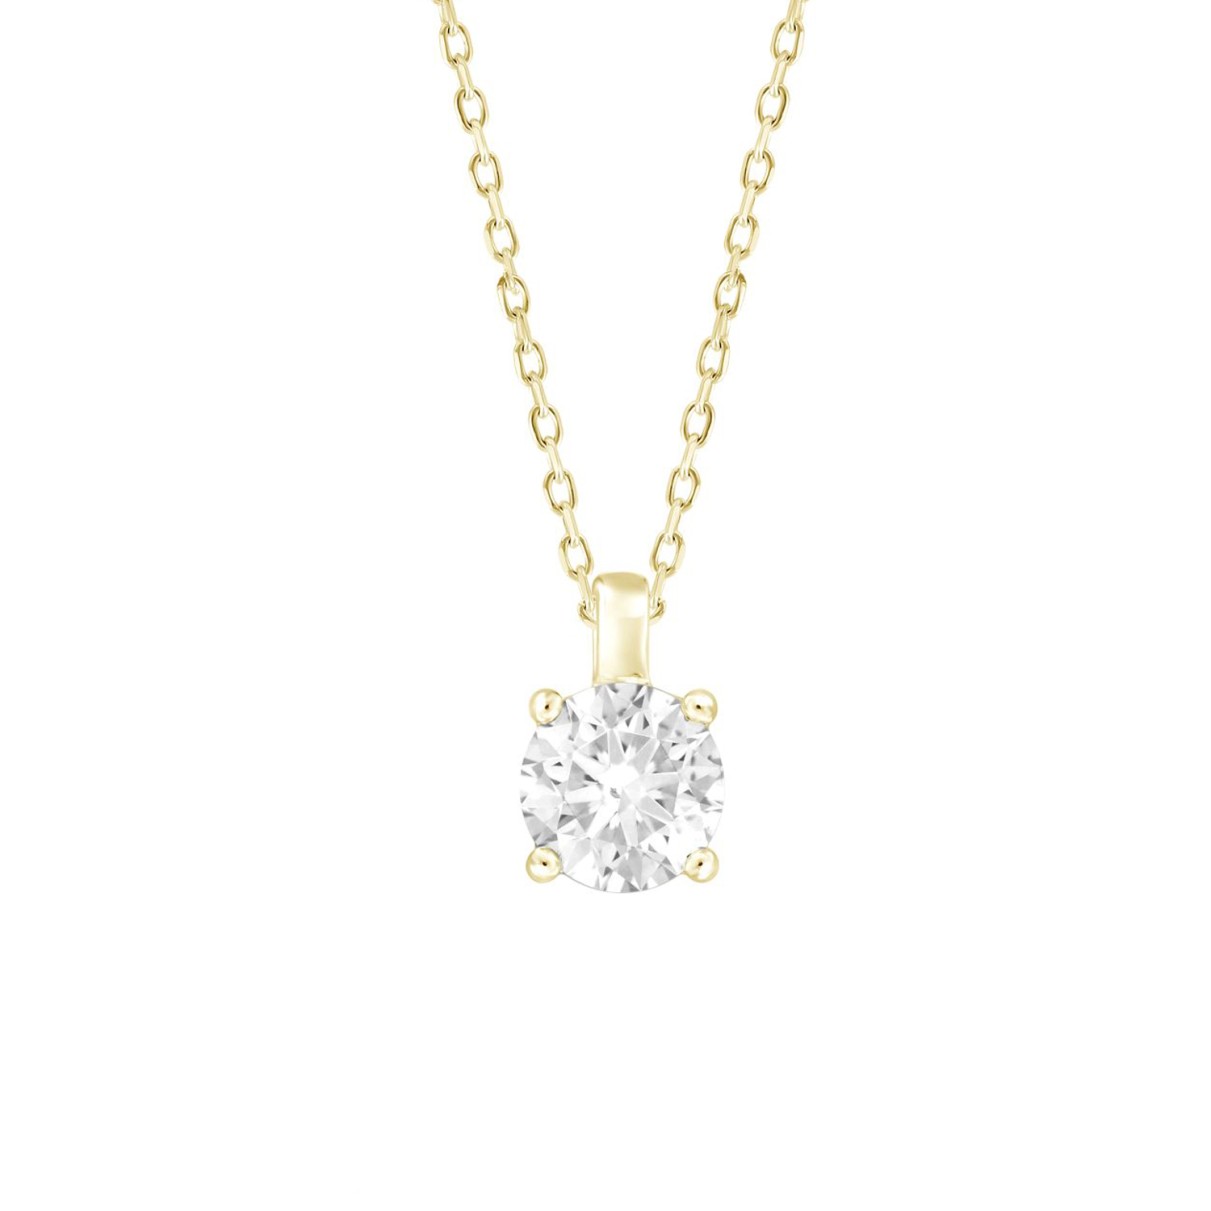 LADIES SOLITAIRE PENDANT WITH CHAIN 3CT ROUND DIAMOND 14K YELLOW GOLD 